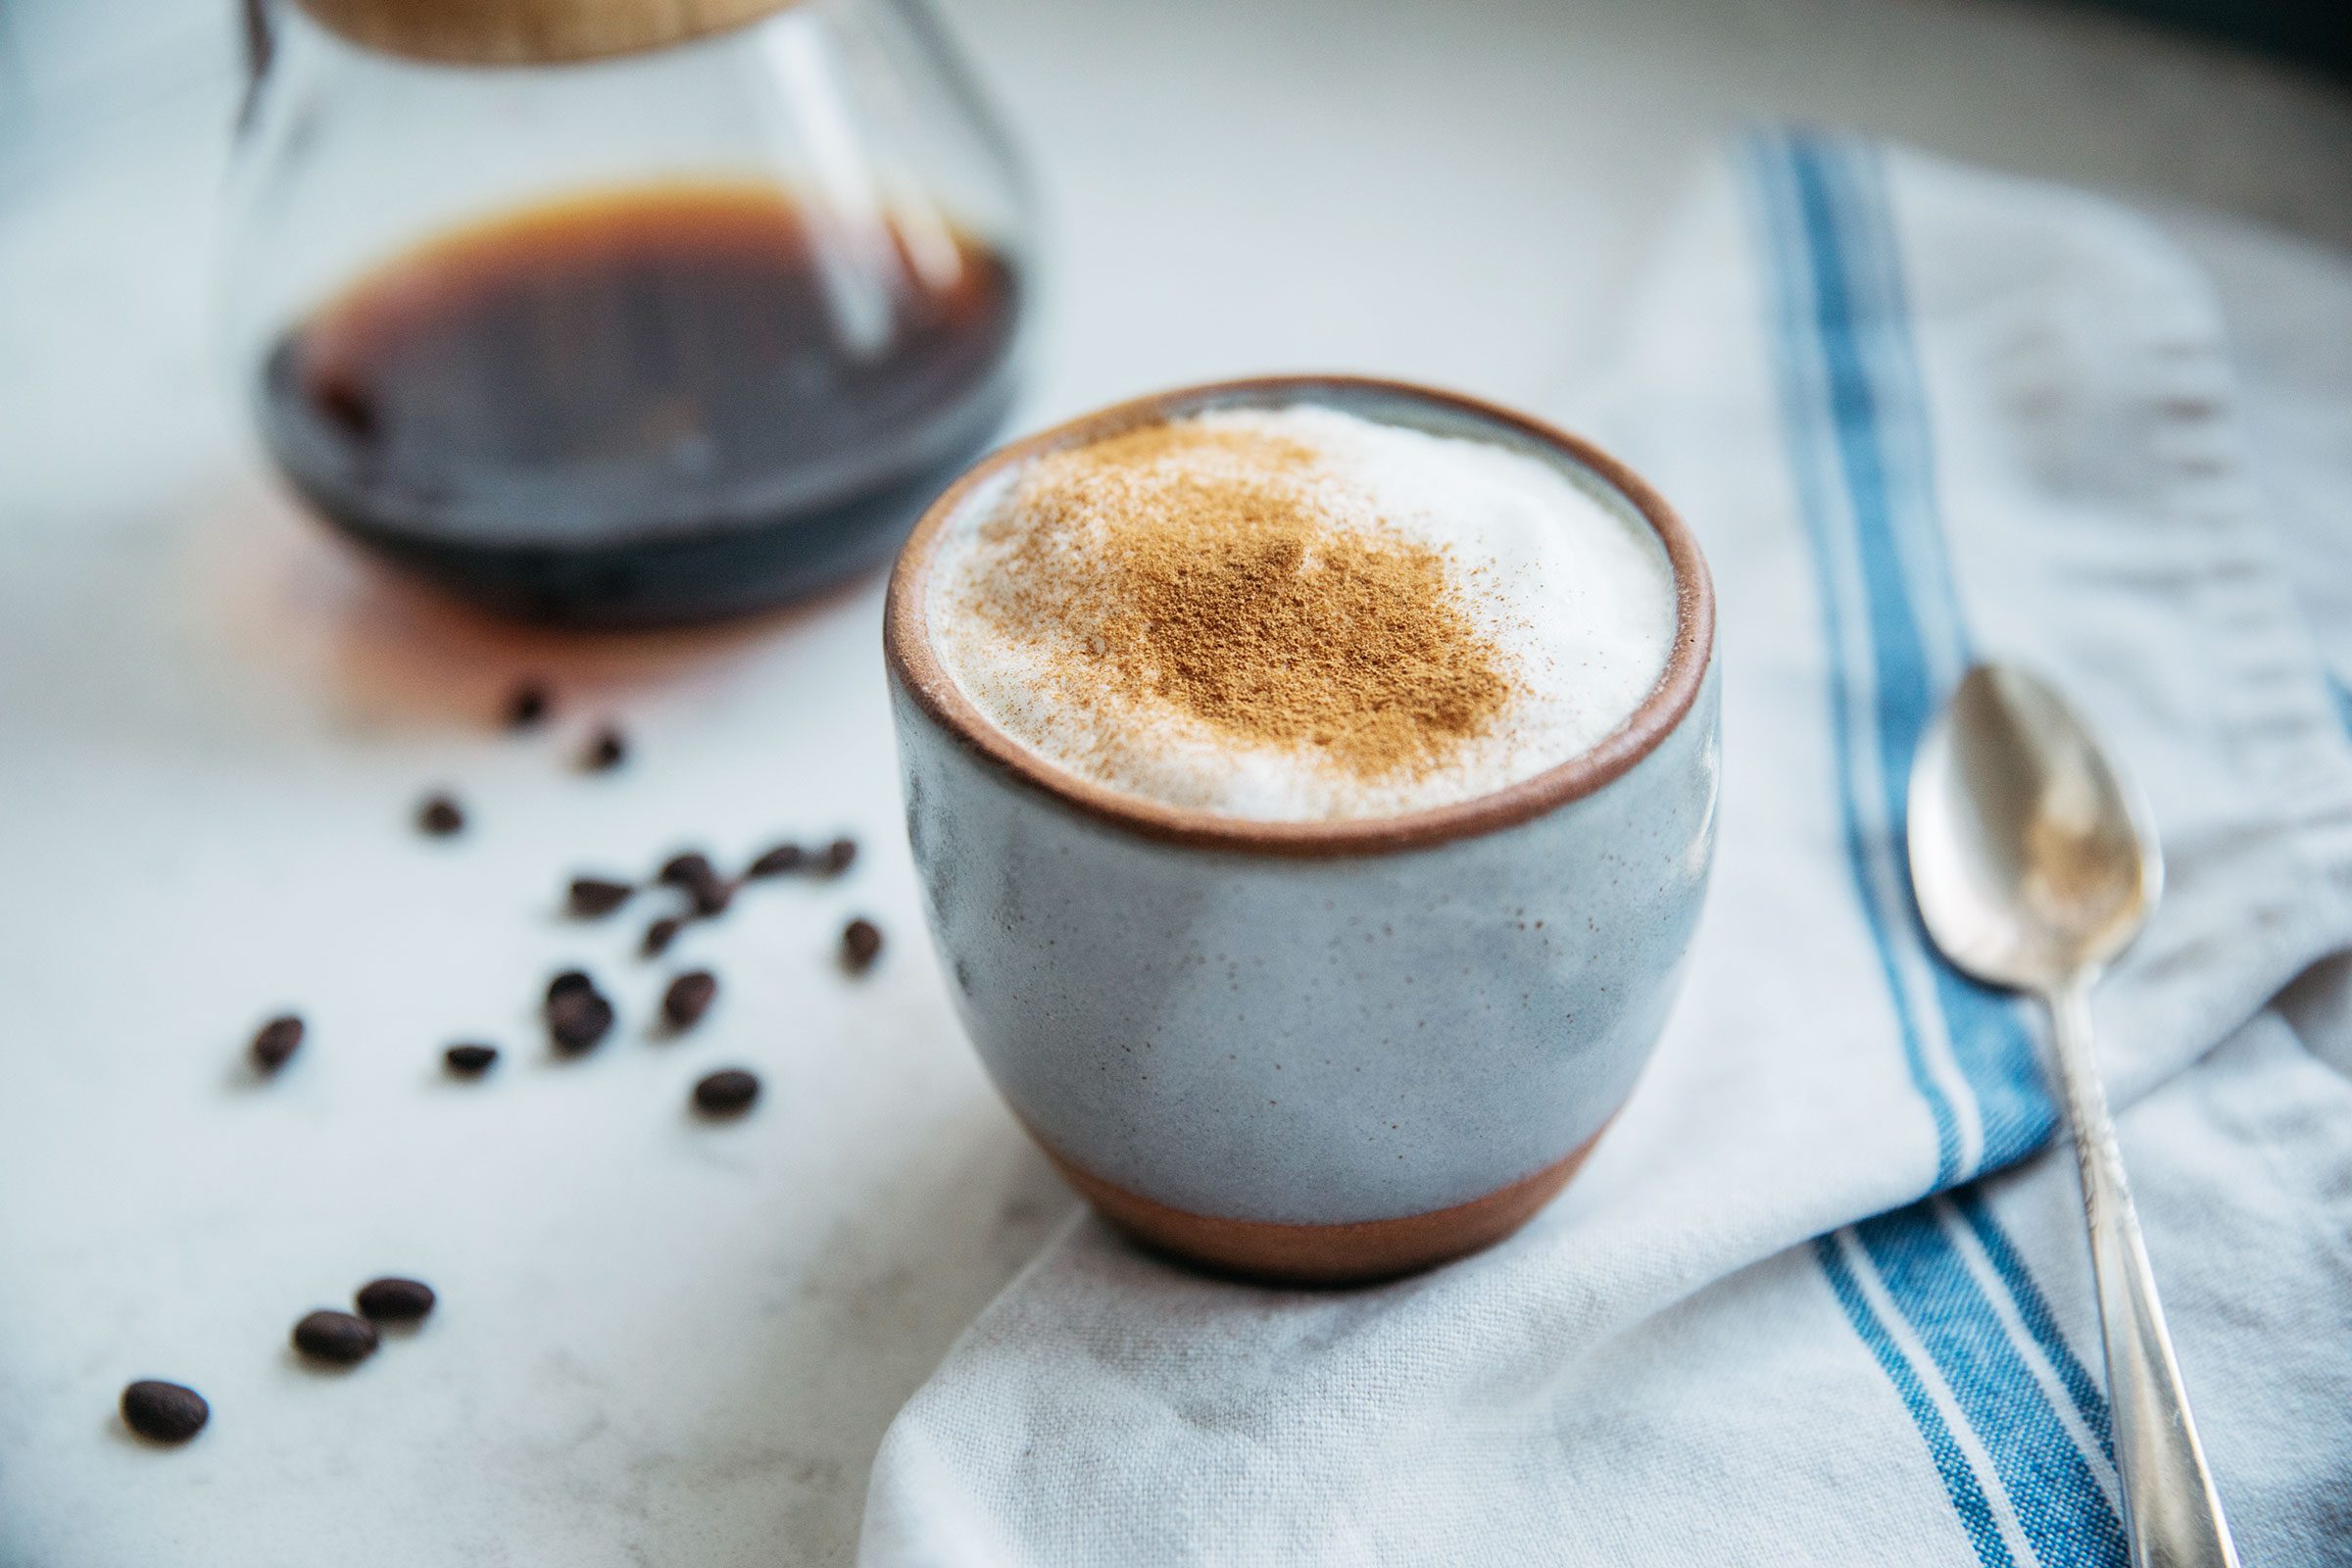 https://www.tasteofhome.com/wp-content/uploads/2020/04/how-to-make-a-latte-at-home-risa-lichtman-for-TOH.jpg